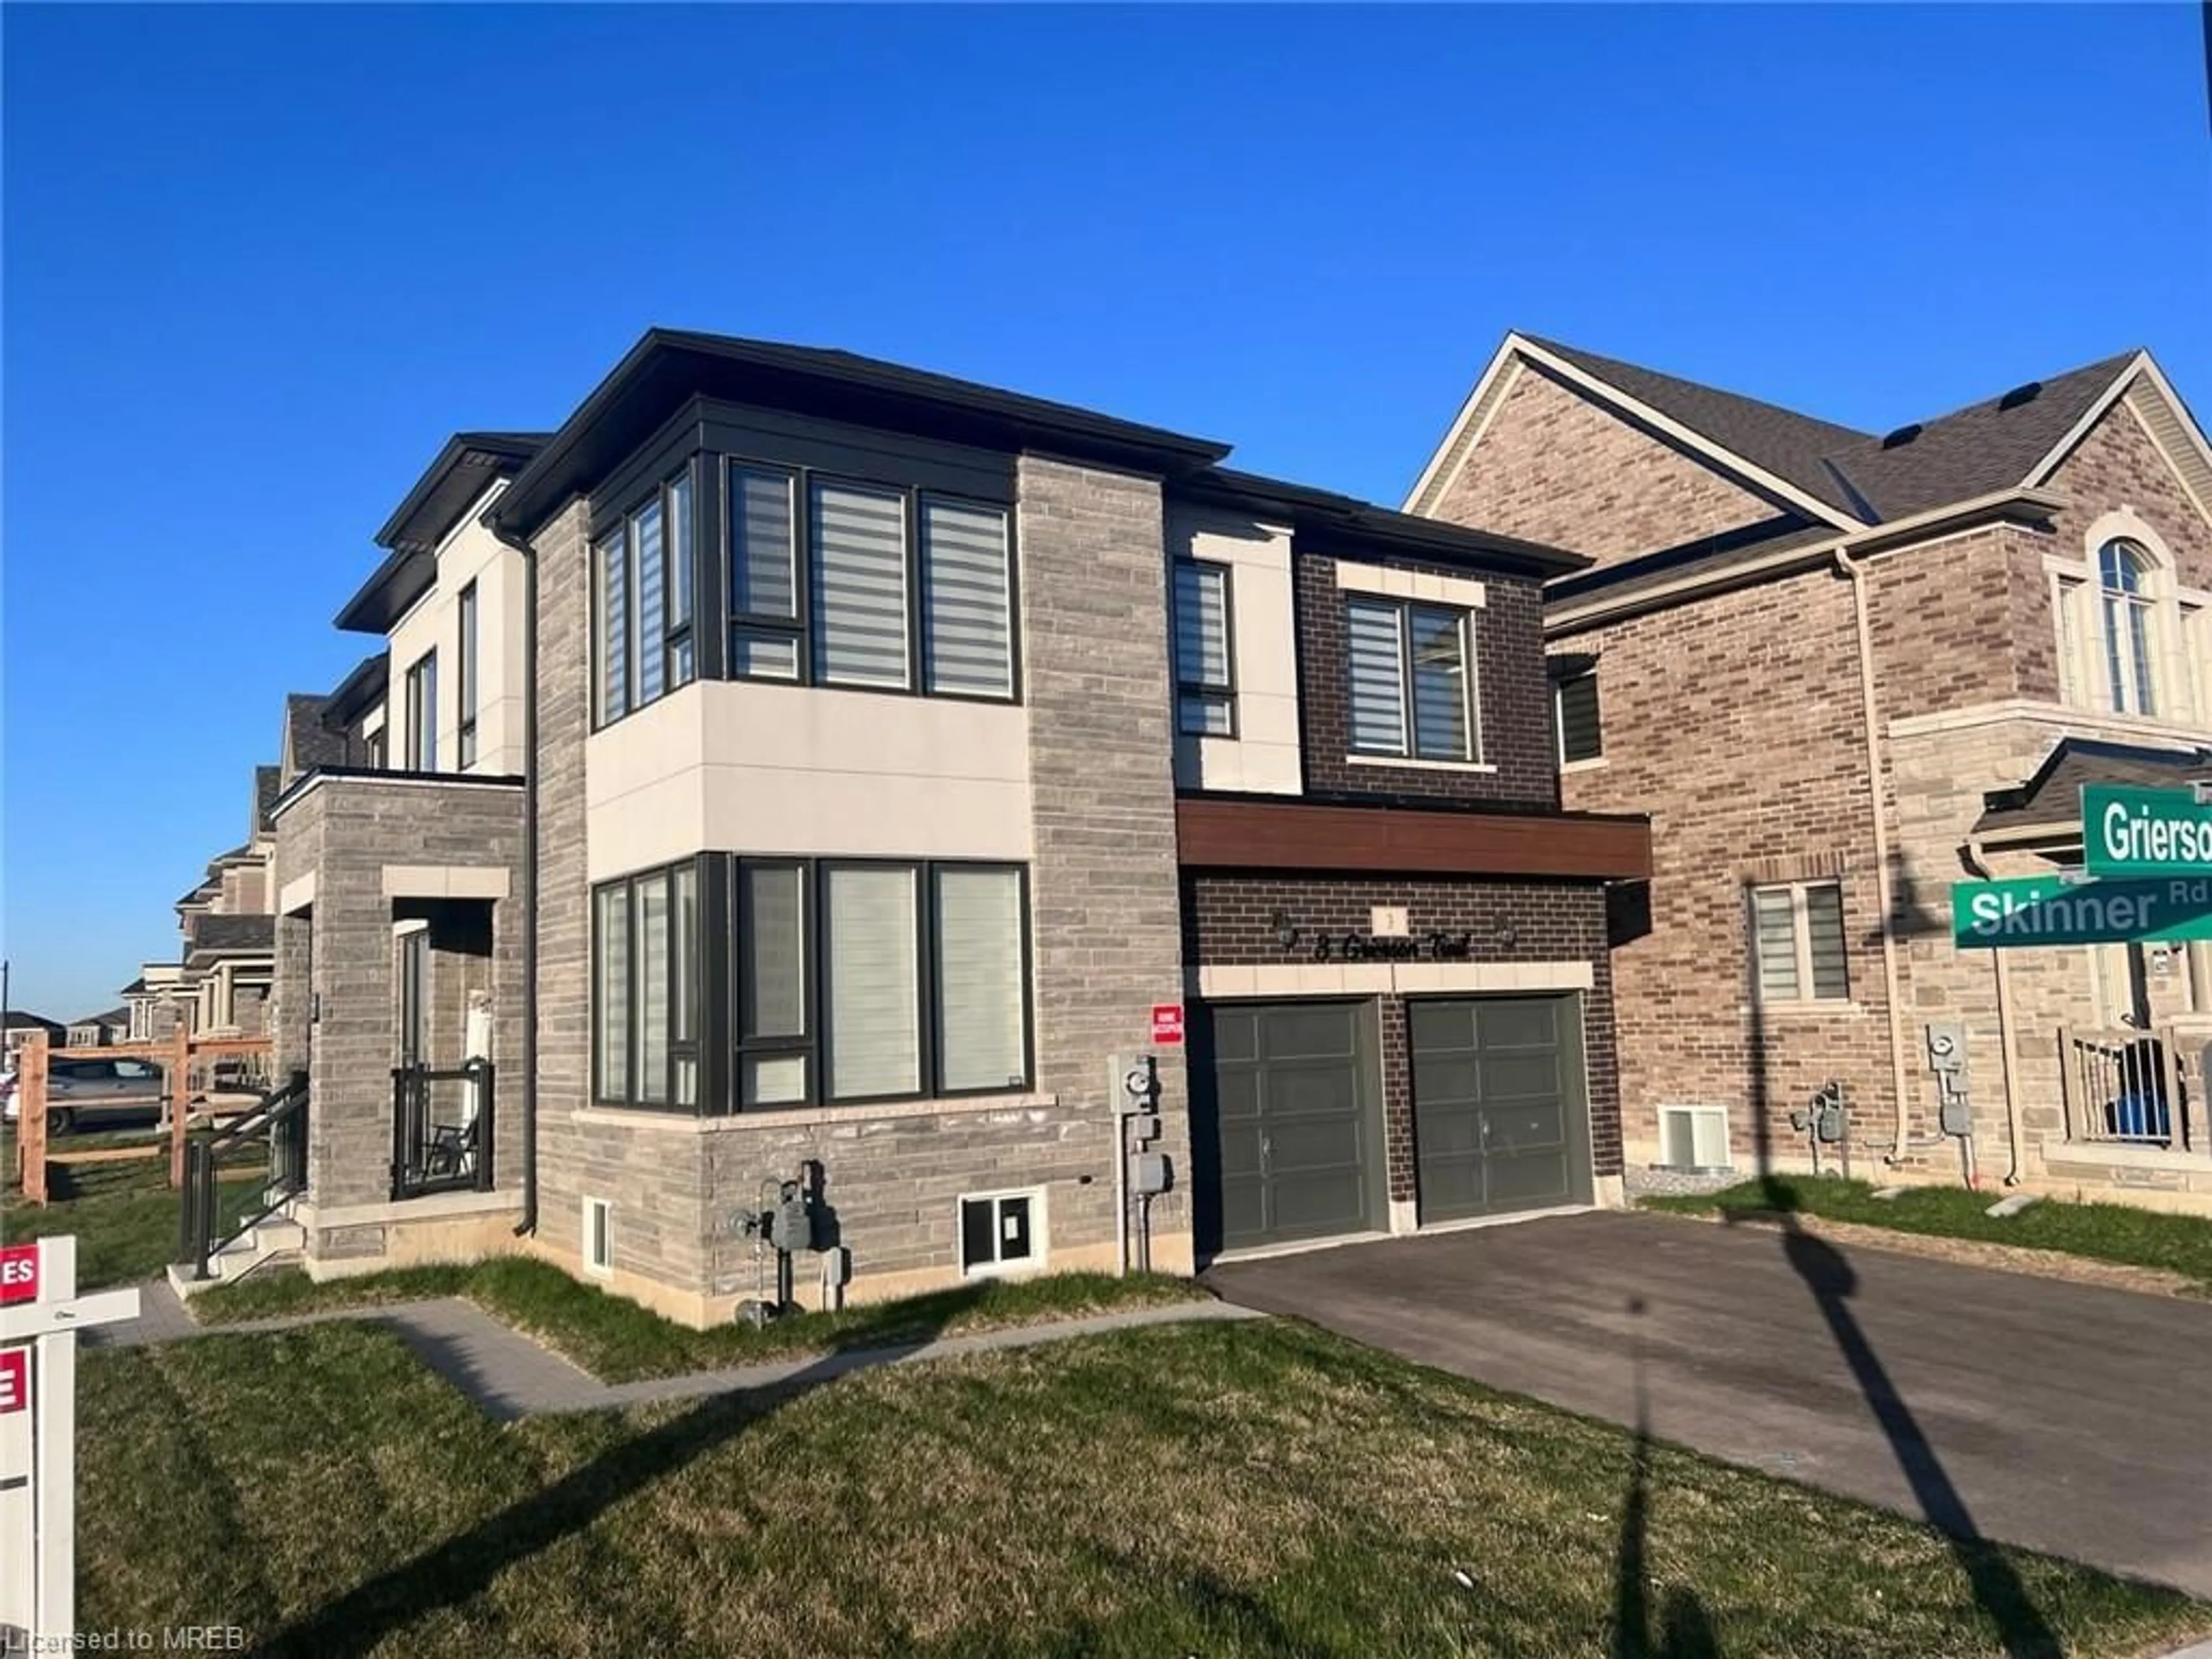 Home with brick exterior material for 3 Grierson Trail, Waterdown Ontario L8B 1Z7